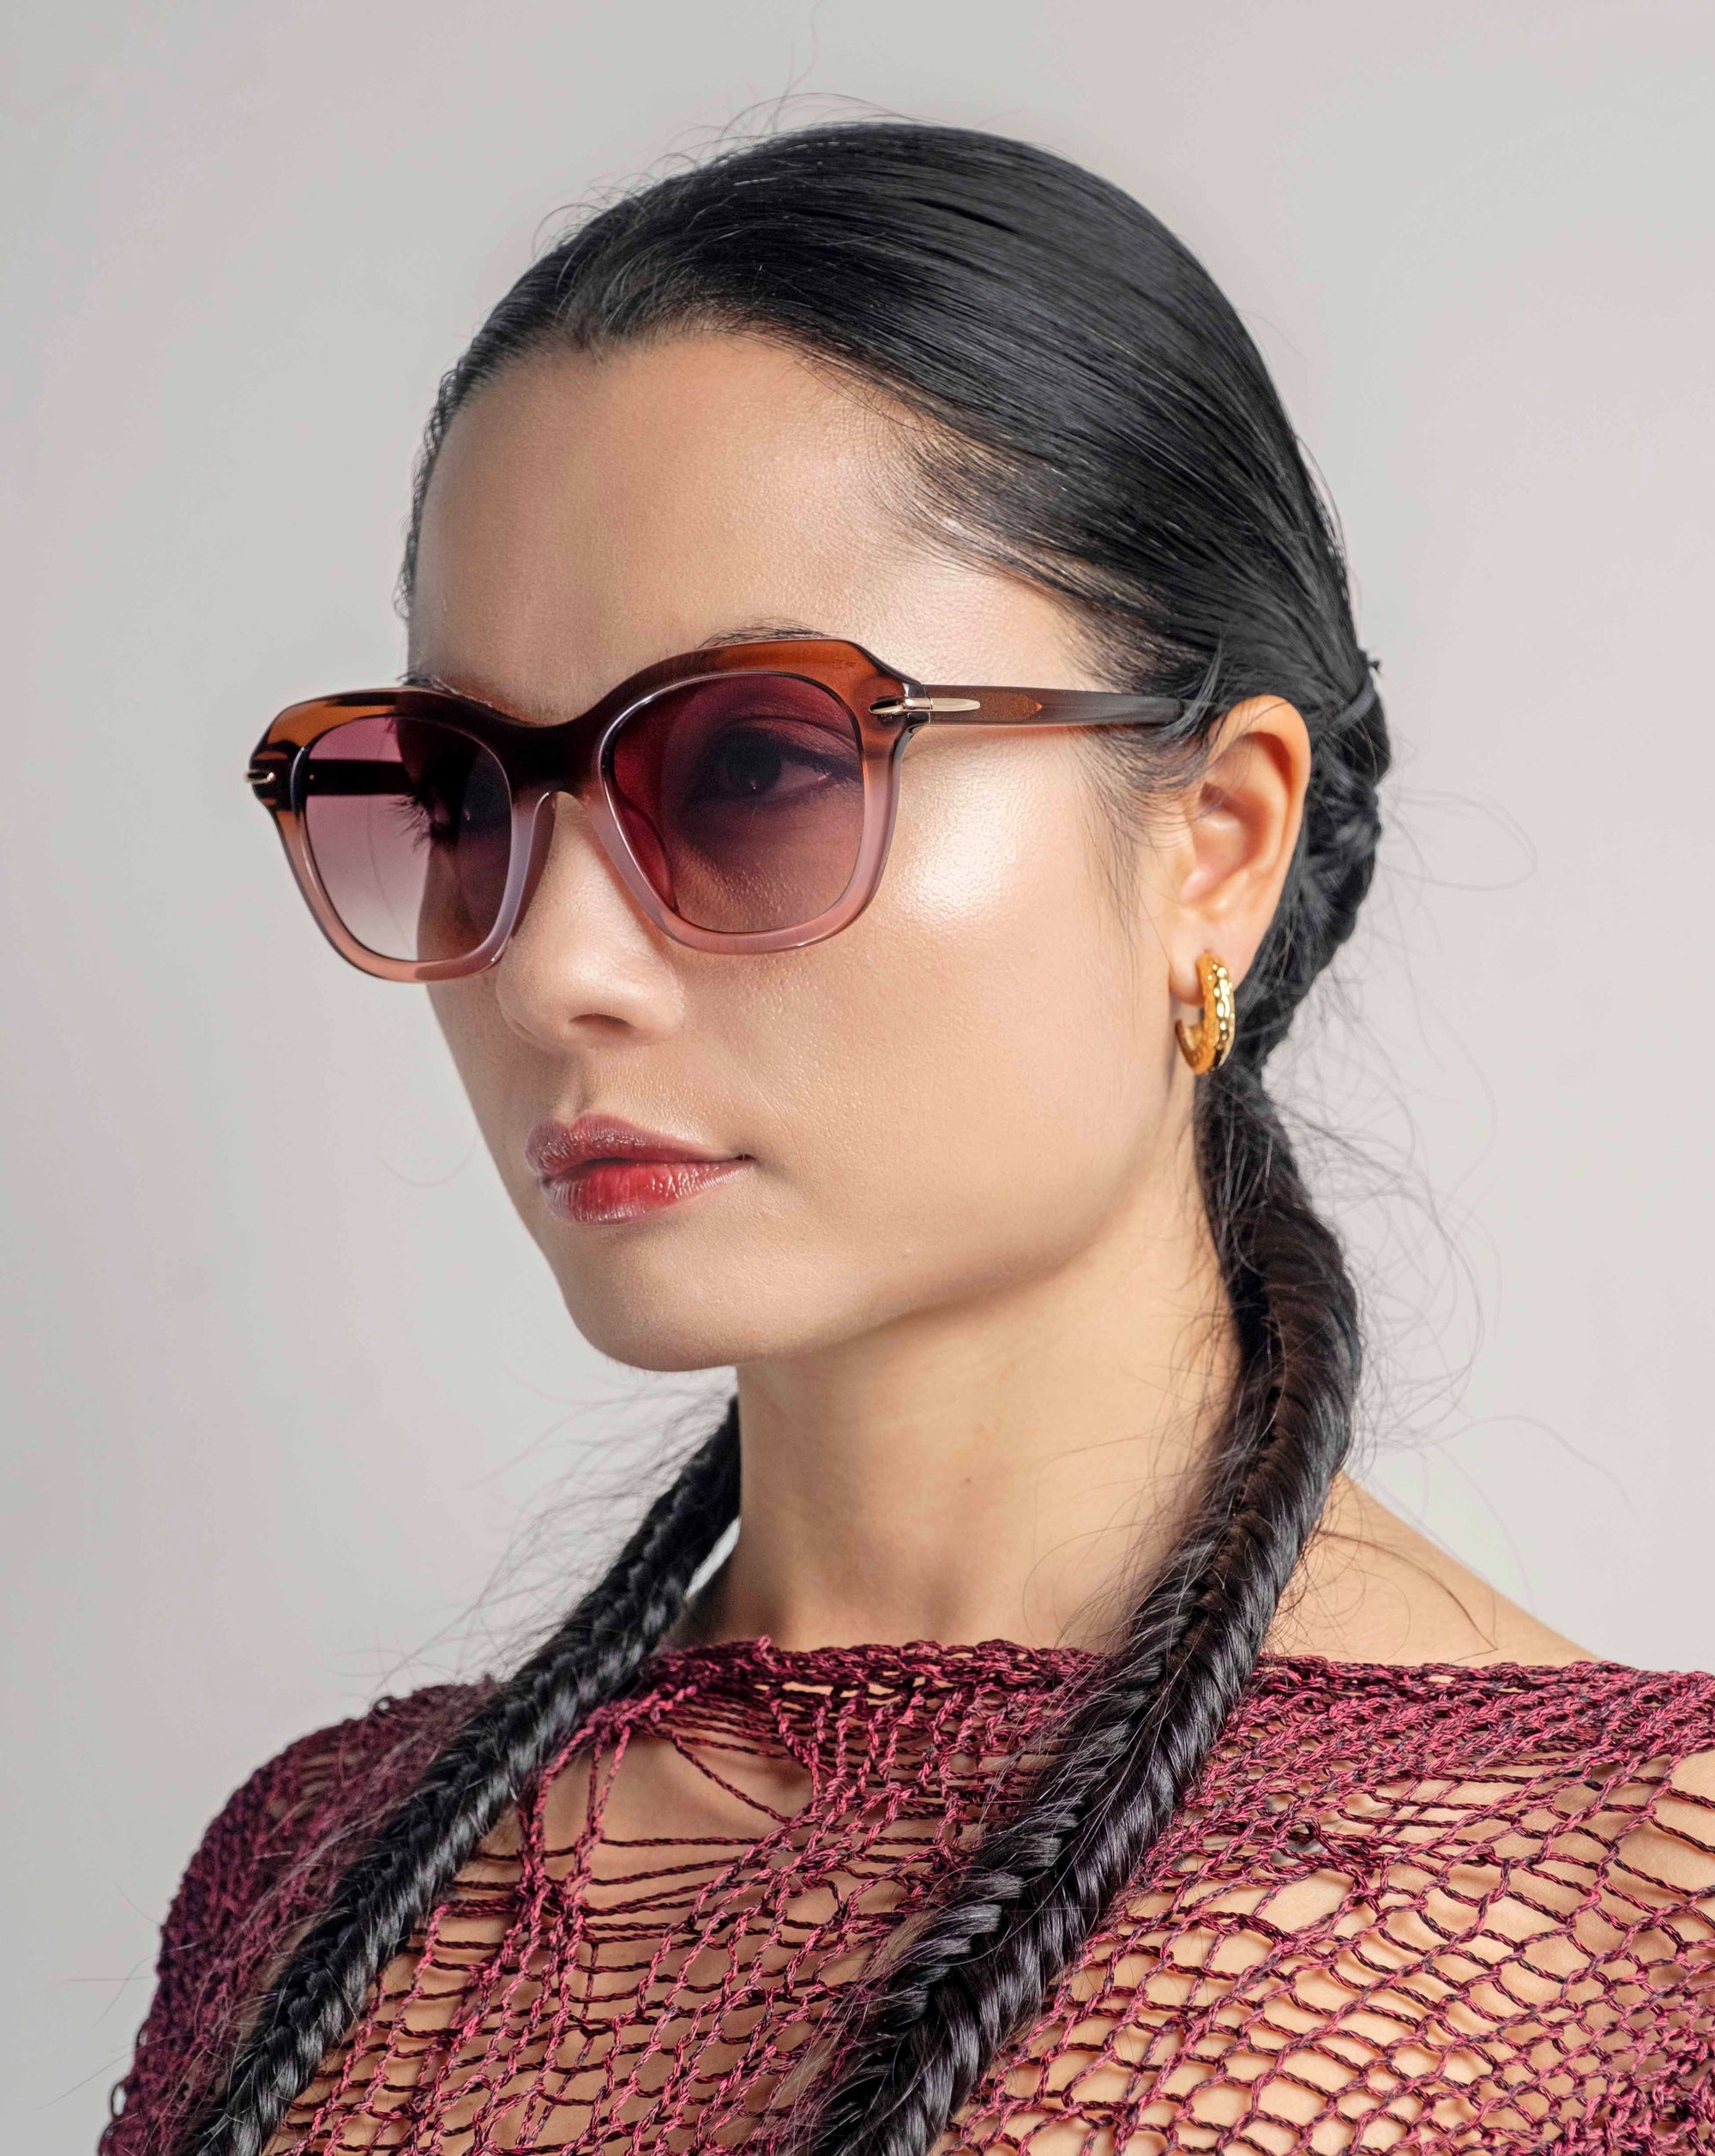 A woman with long, black braids wears oversized cat-eye sunglasses "Helene" by For Art's Sake®. She has gold hoop earrings and a calm expression, facing slightly to the right. The background is a plain, neutral tone.